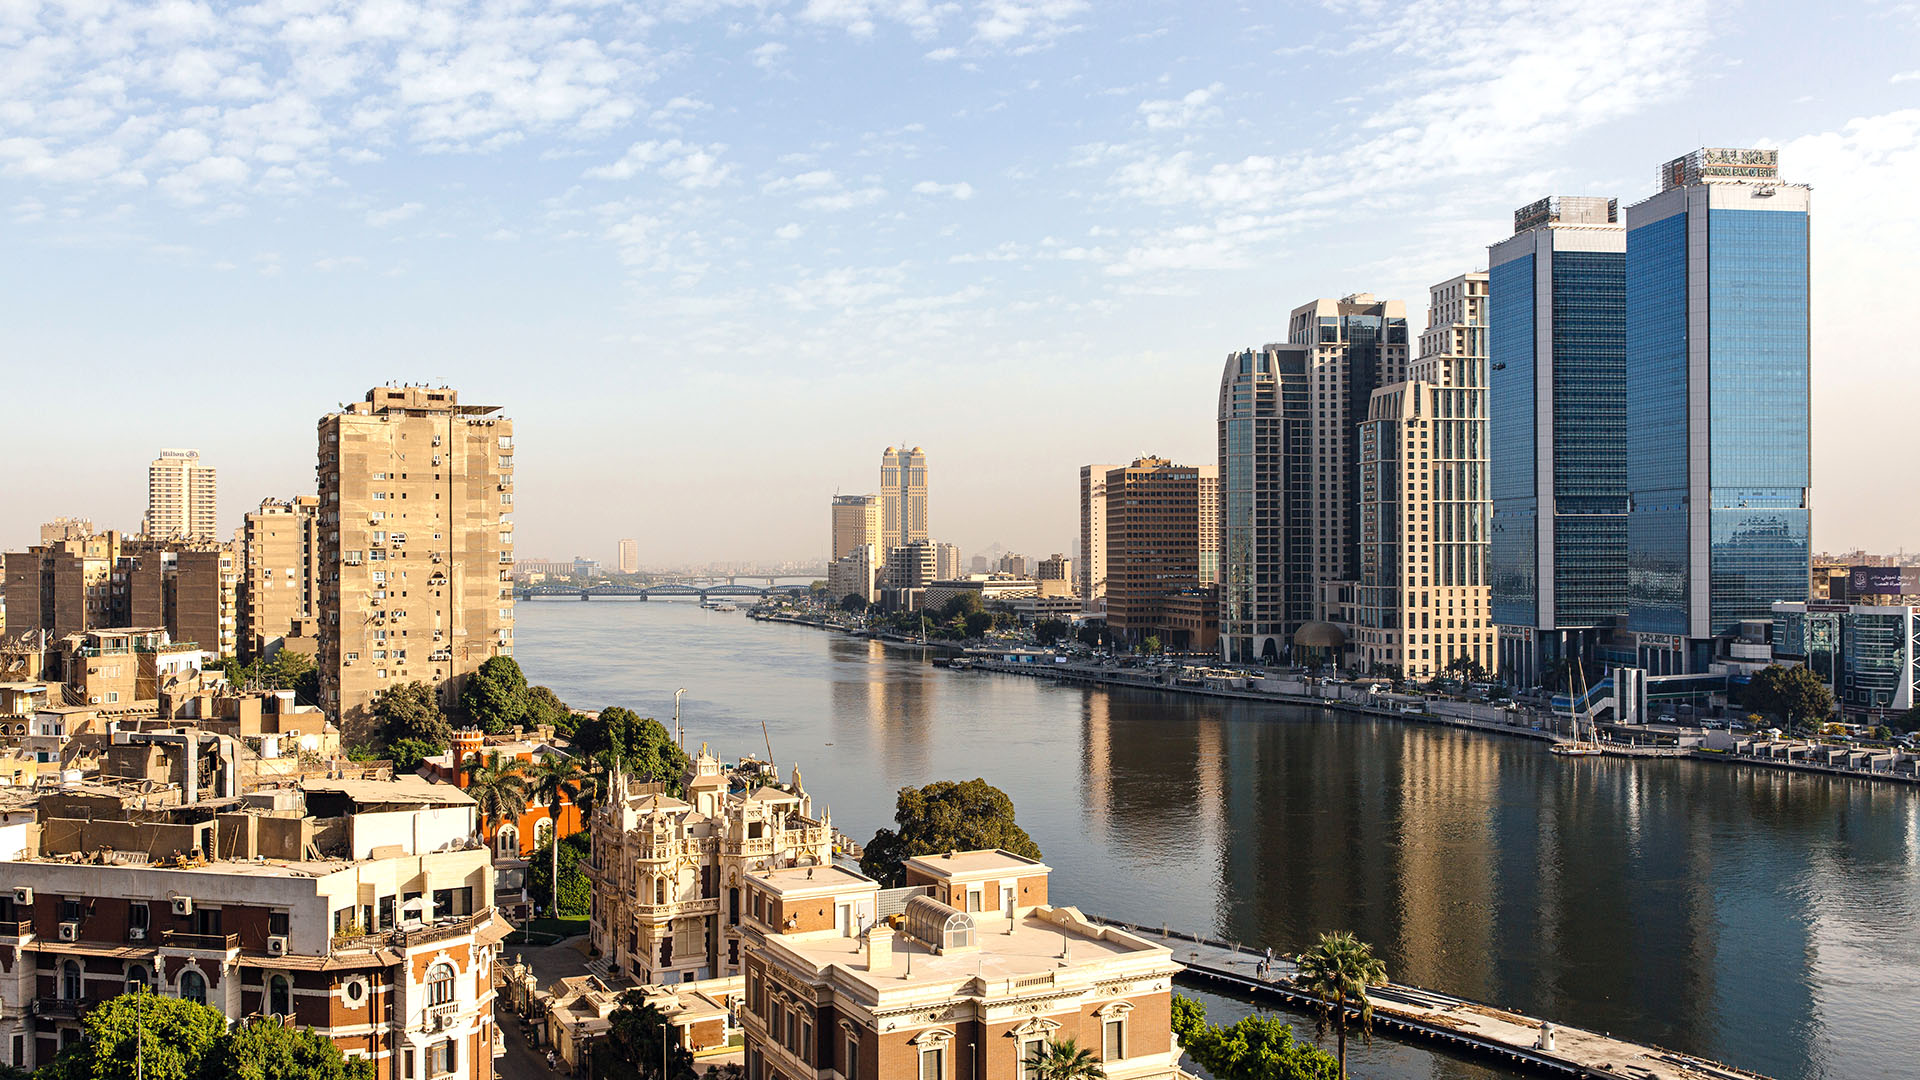 Old city and greenspace and new modern high rises by waterfront in Cairo, Egypt